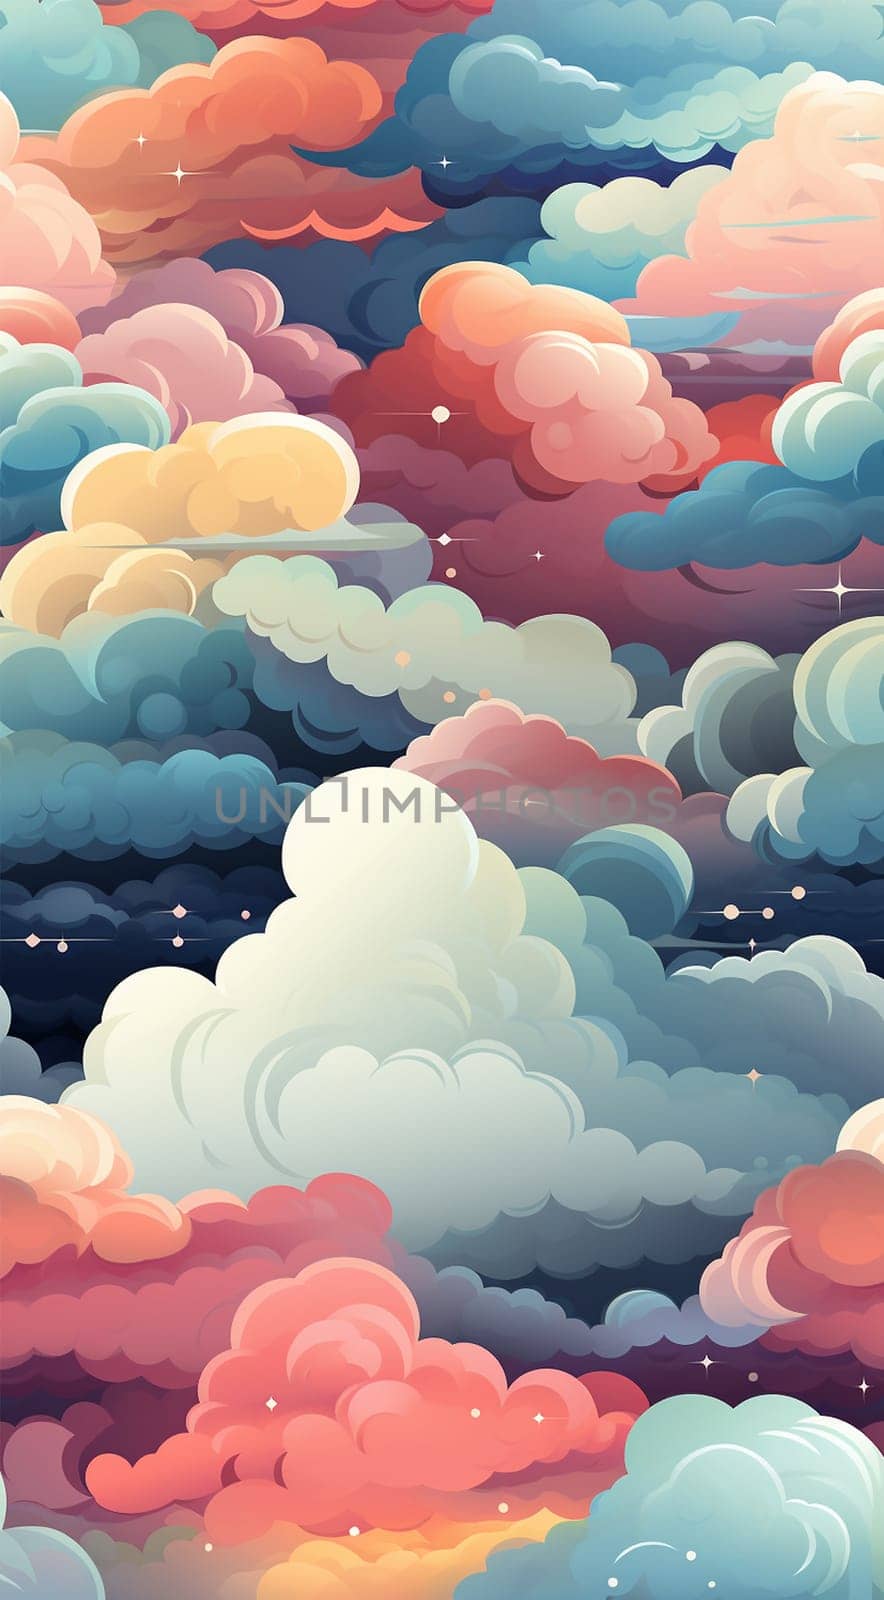 Cute colorful pastel clouds seamless pattern background. Rainbow unicorn background with clouds and stars. Pastel color sky. Magical landscape, abstract fabulous pattern. Cute candy wallpaper. Copy space